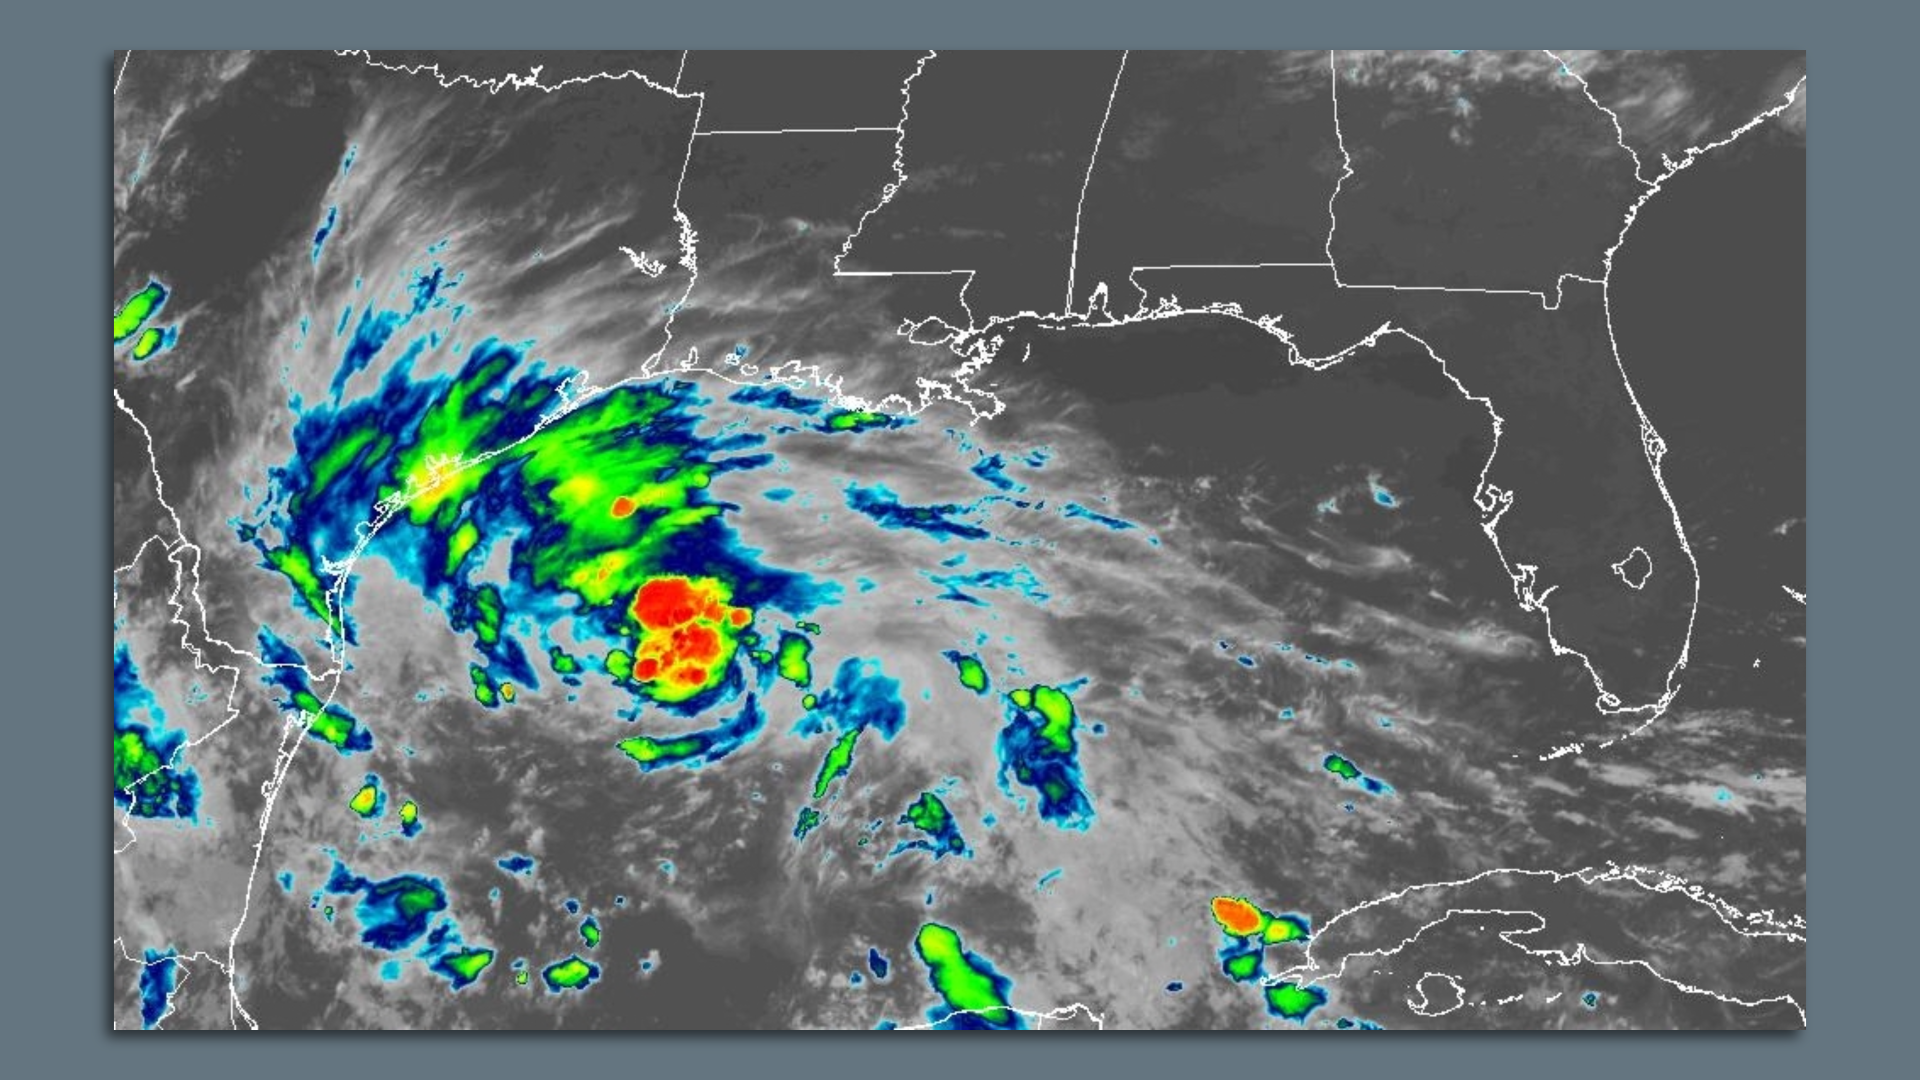 Graphic shows a satellite image of the Gulf of Mexico with a tropical depression brewing